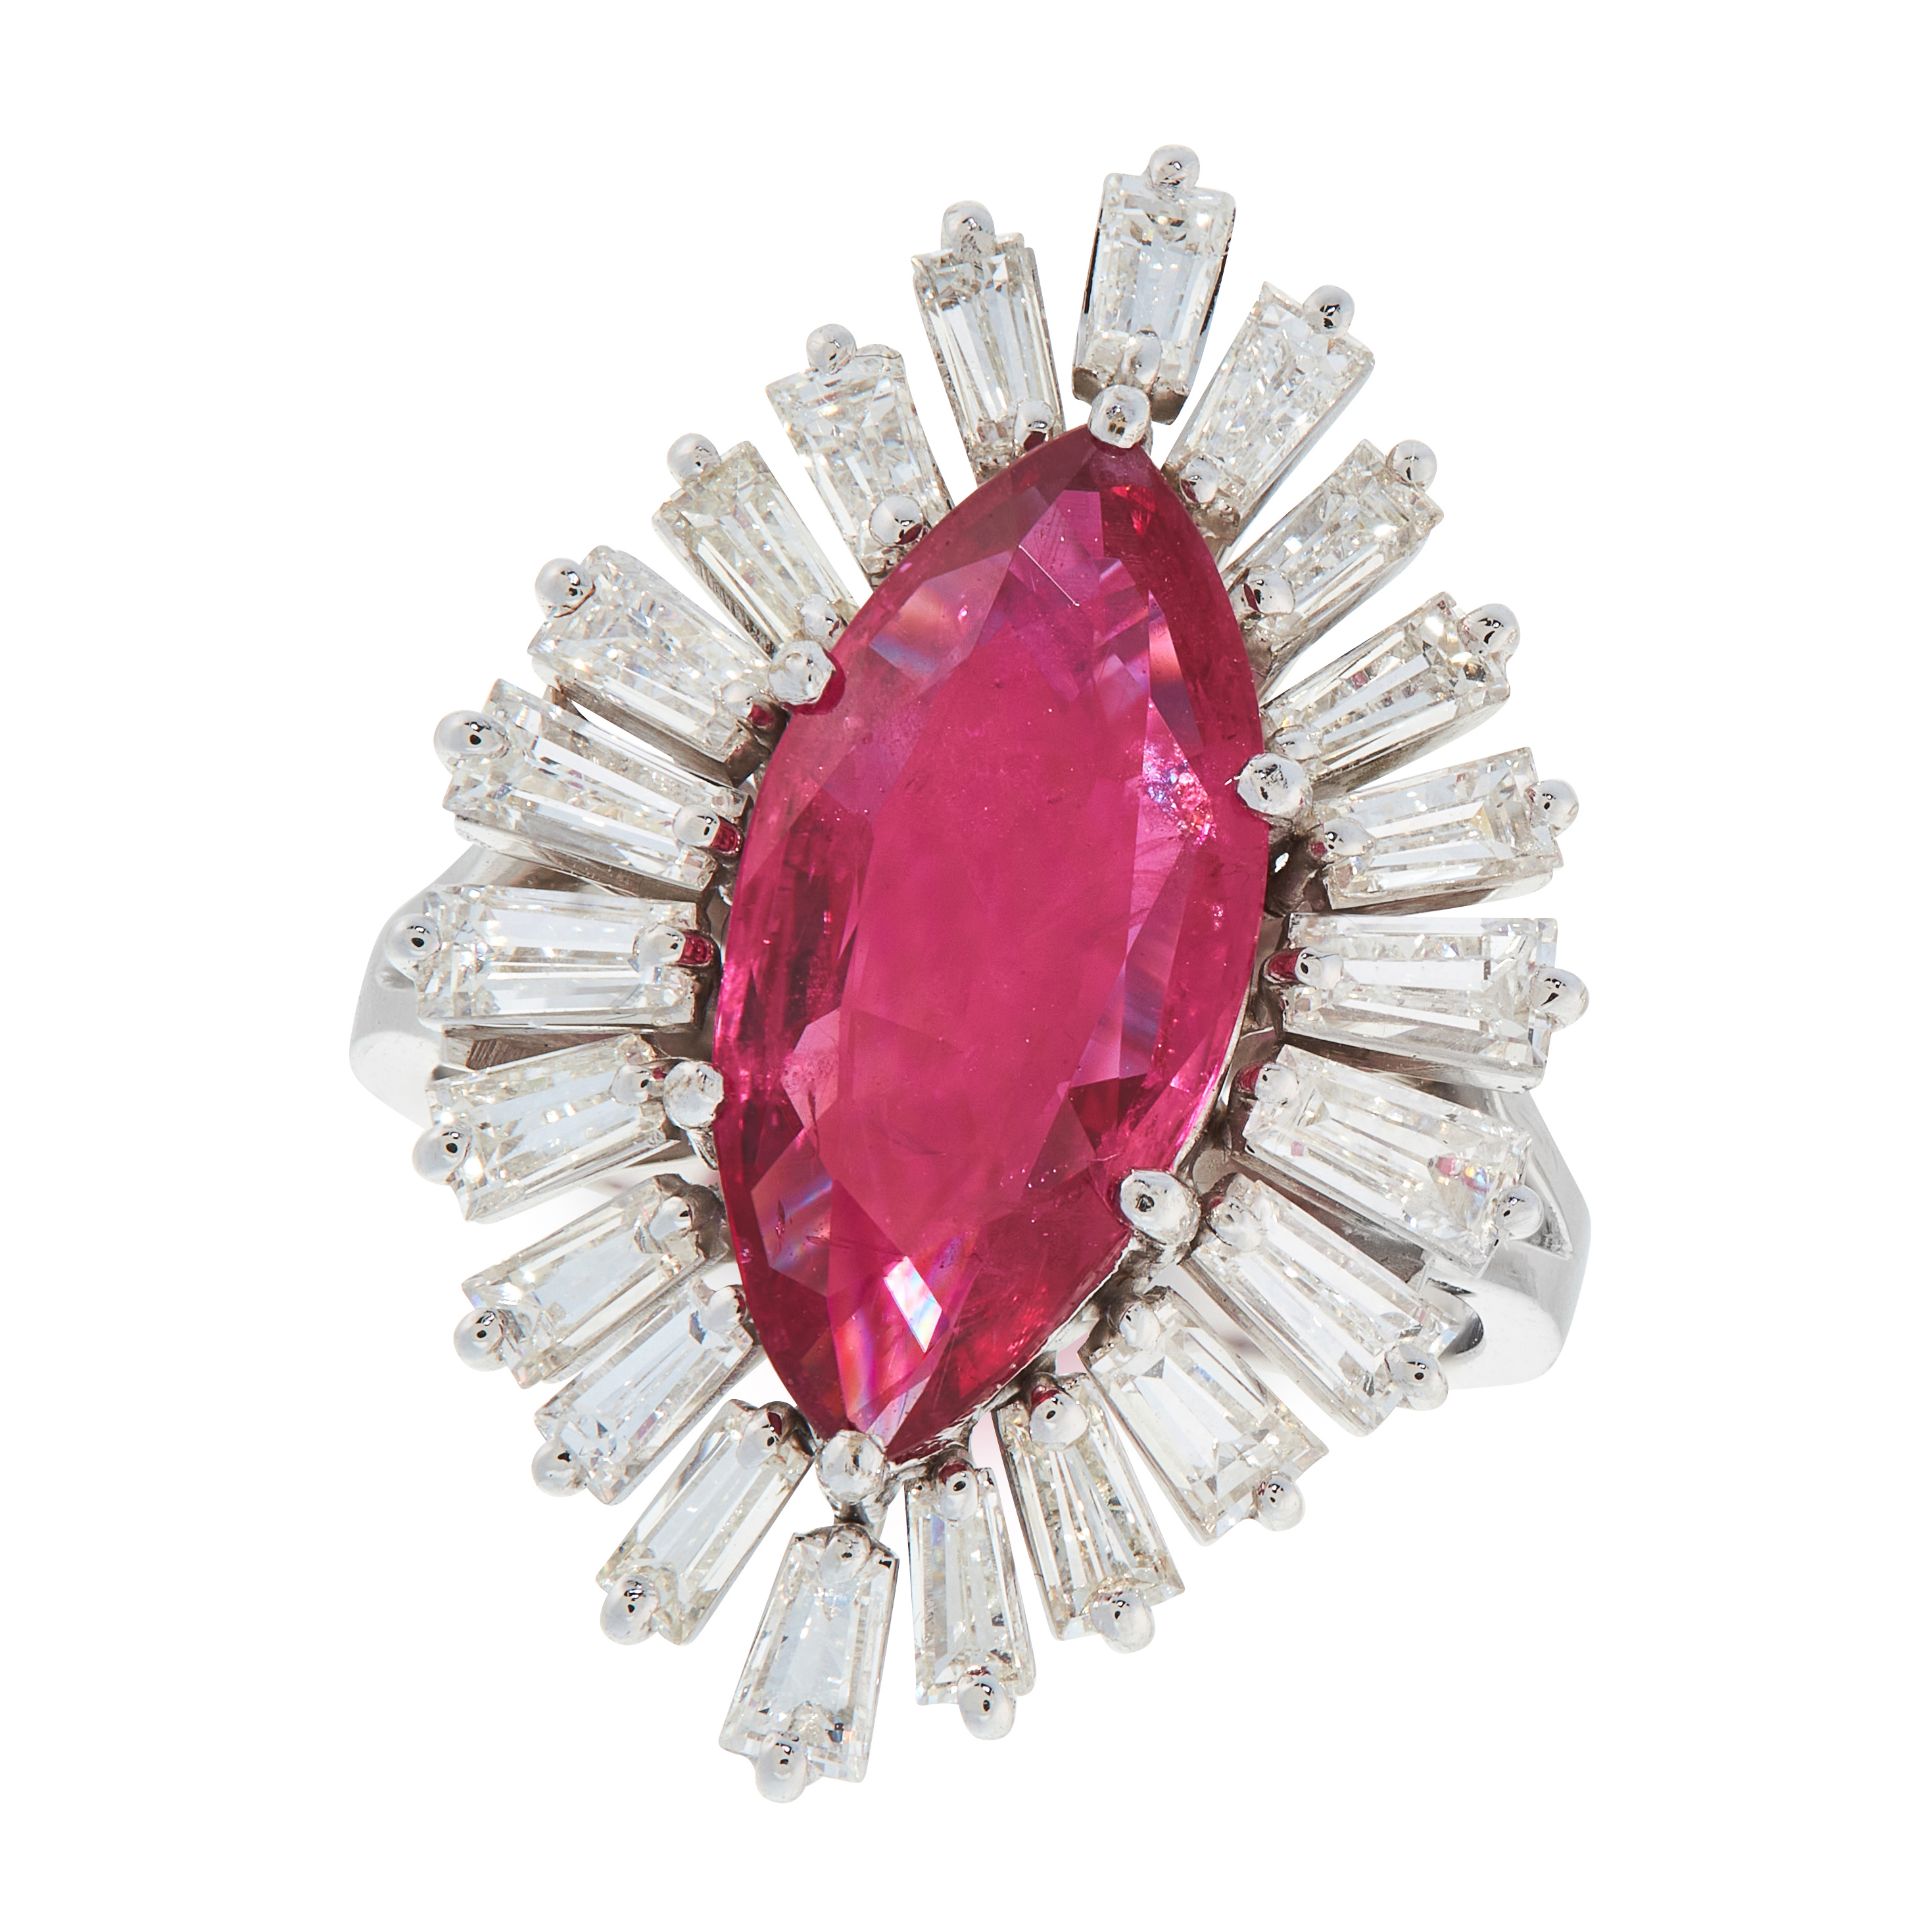 A RUBY AND DIAMOND DRESS RING in 18ct white gold, set with a marquise cut ruby of 4.02 carats in a